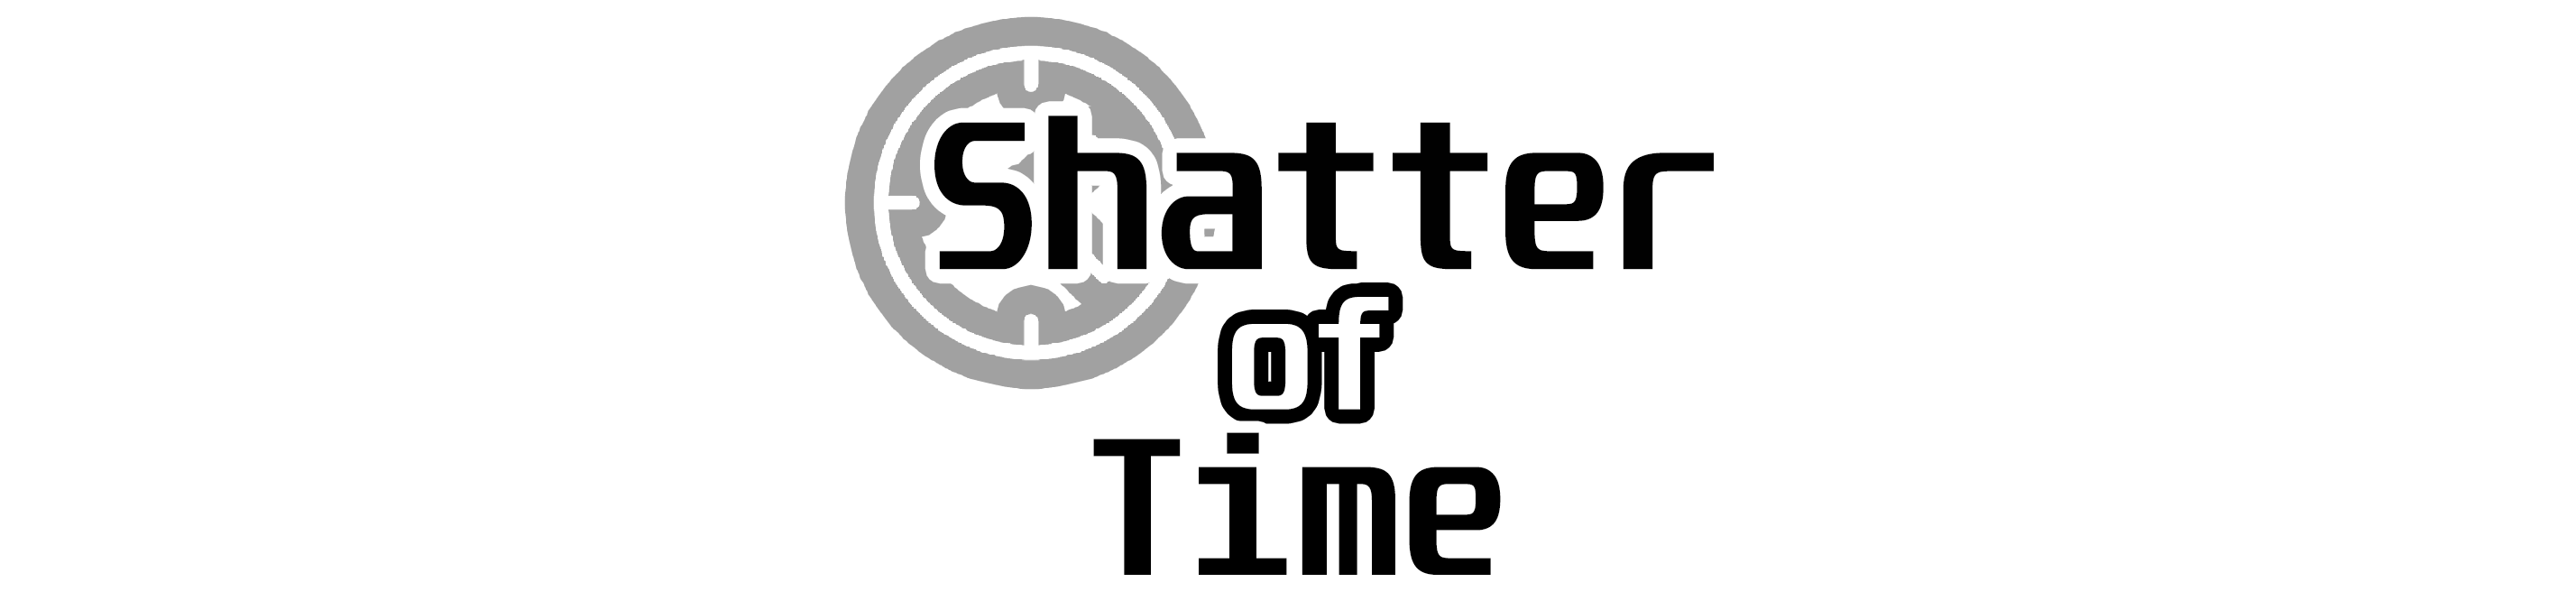 Shatter of Time